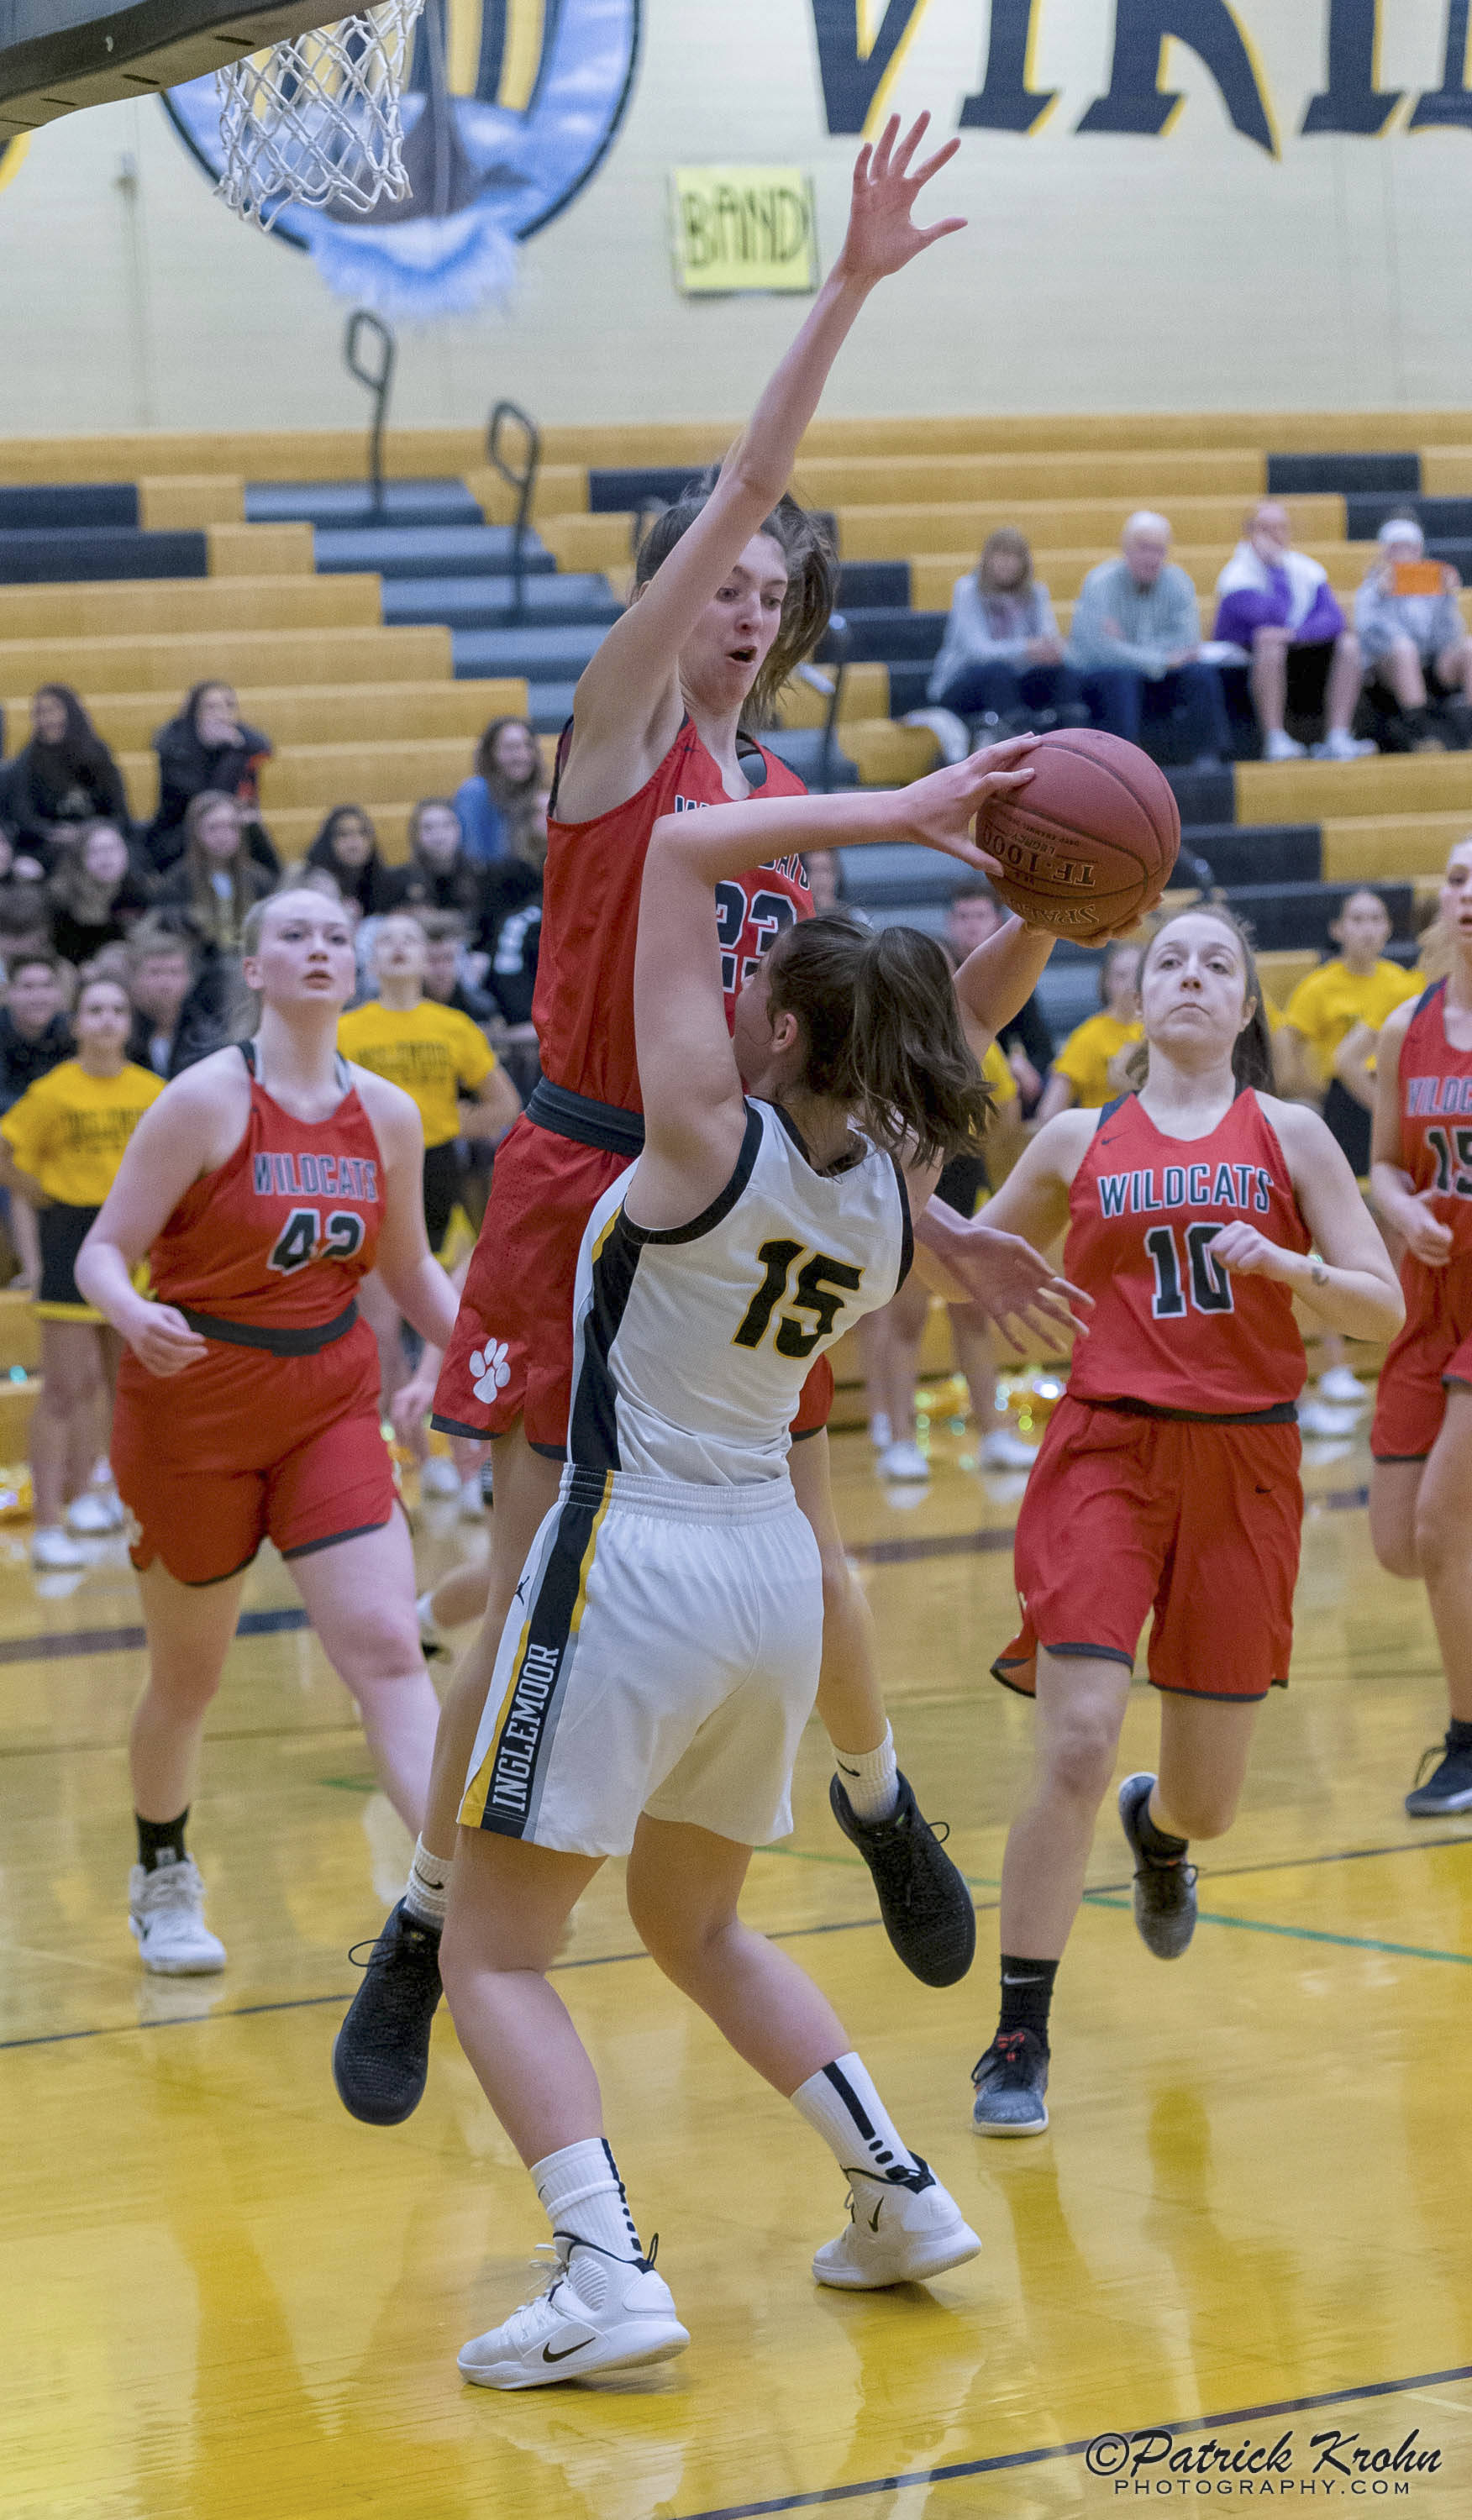 Inglemoor junior Cecelia Bresee, right, is defended proficiently by Mount Si freshman forward Lauren Glazier, left, during a Wes-King 4A district playoff game on Feb. 7 at Inglemoor High School in Kenmore. Photo courtesy of Patrick Krohn/Patrick Krohn Photography